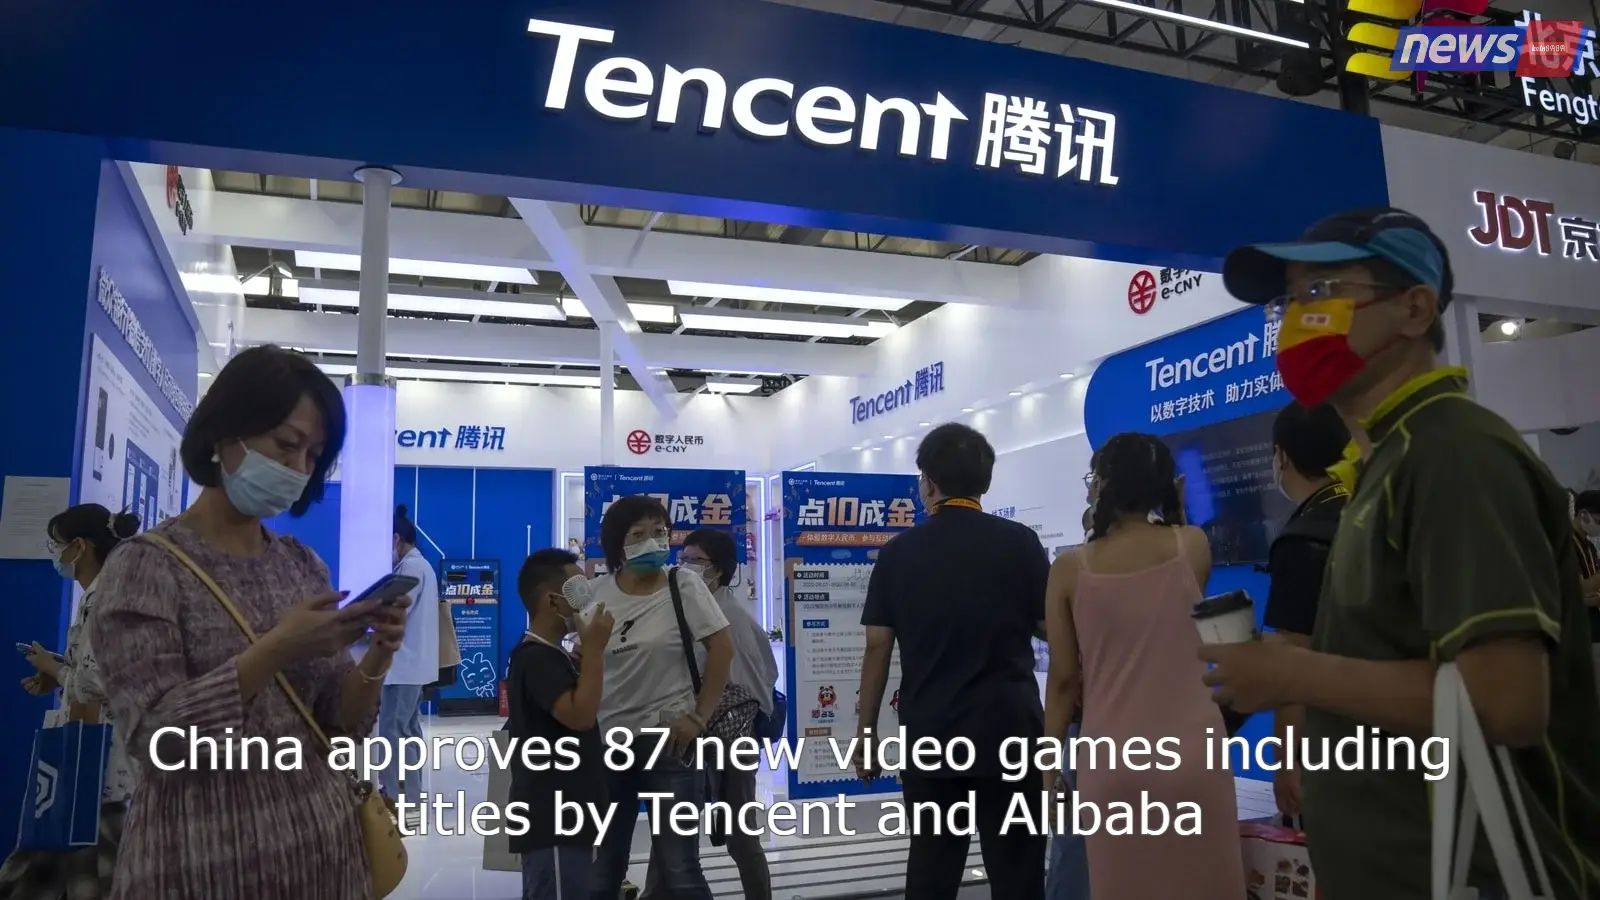 China approves 87 new video games including titles by Tencent and Alibaba